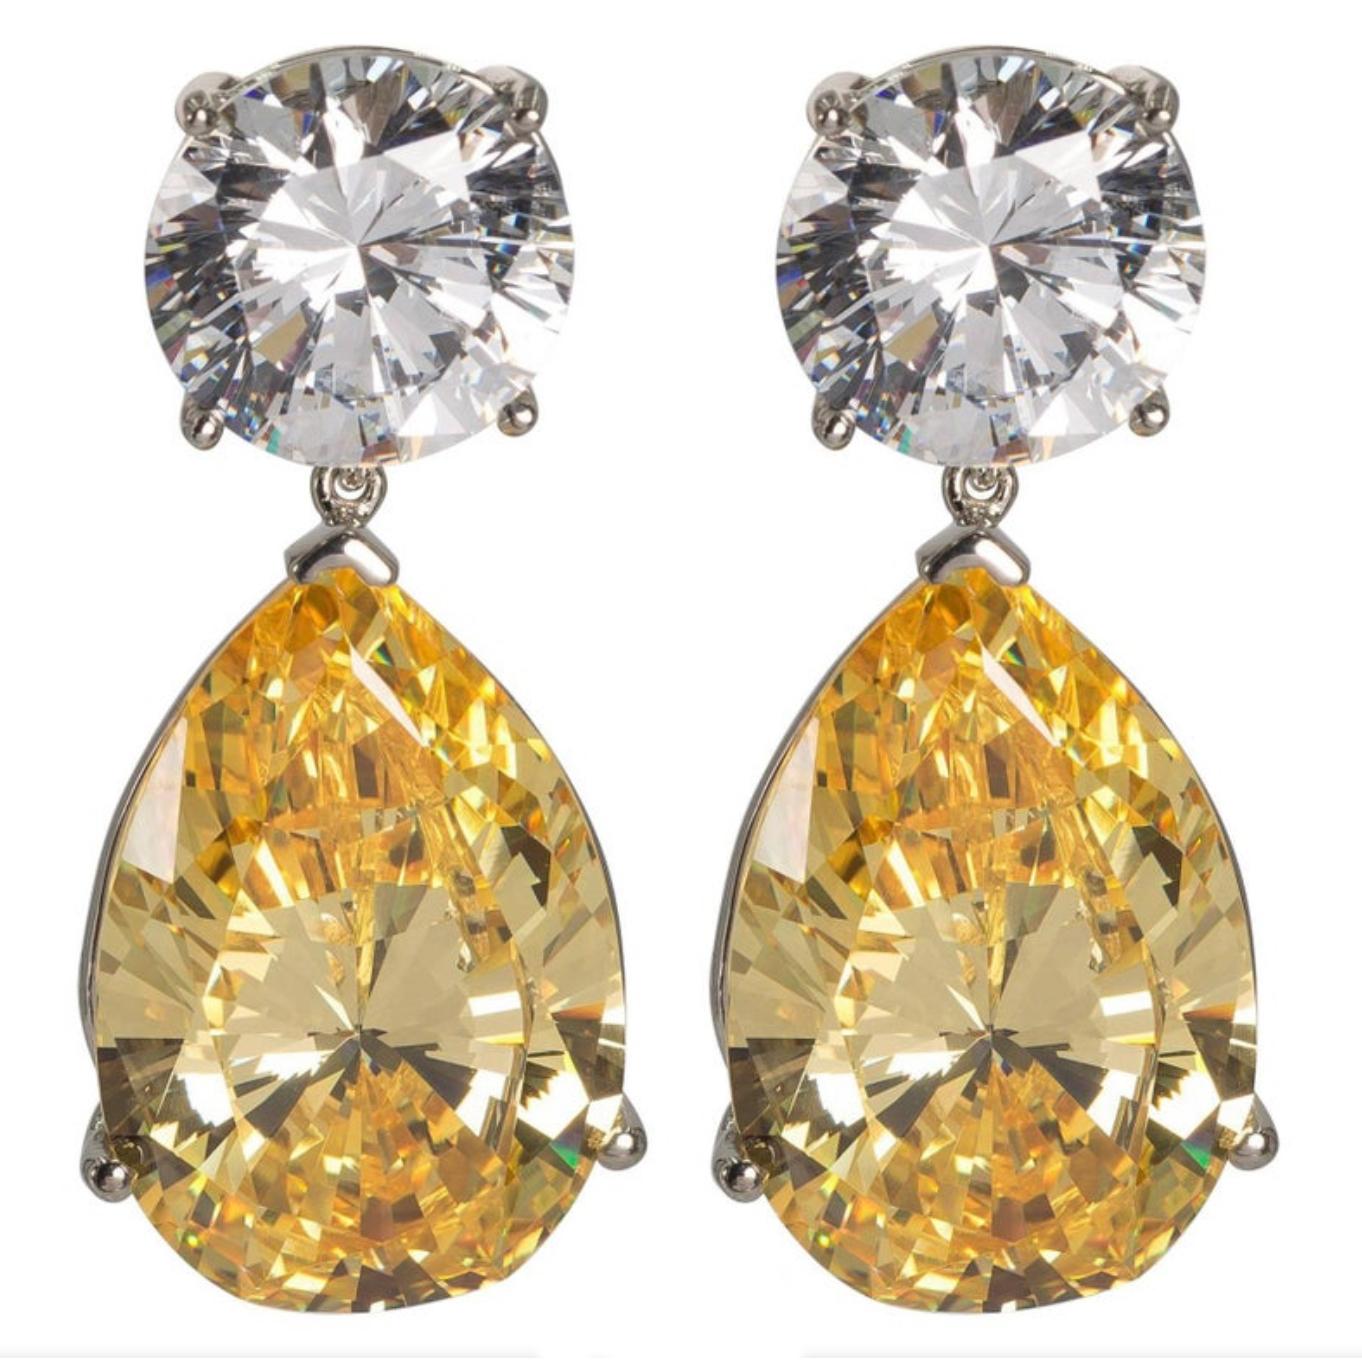  Large  Created Diamond Look White and Yellow Drop CZ Earrings by Clive Kandel In New Condition For Sale In New York, NY